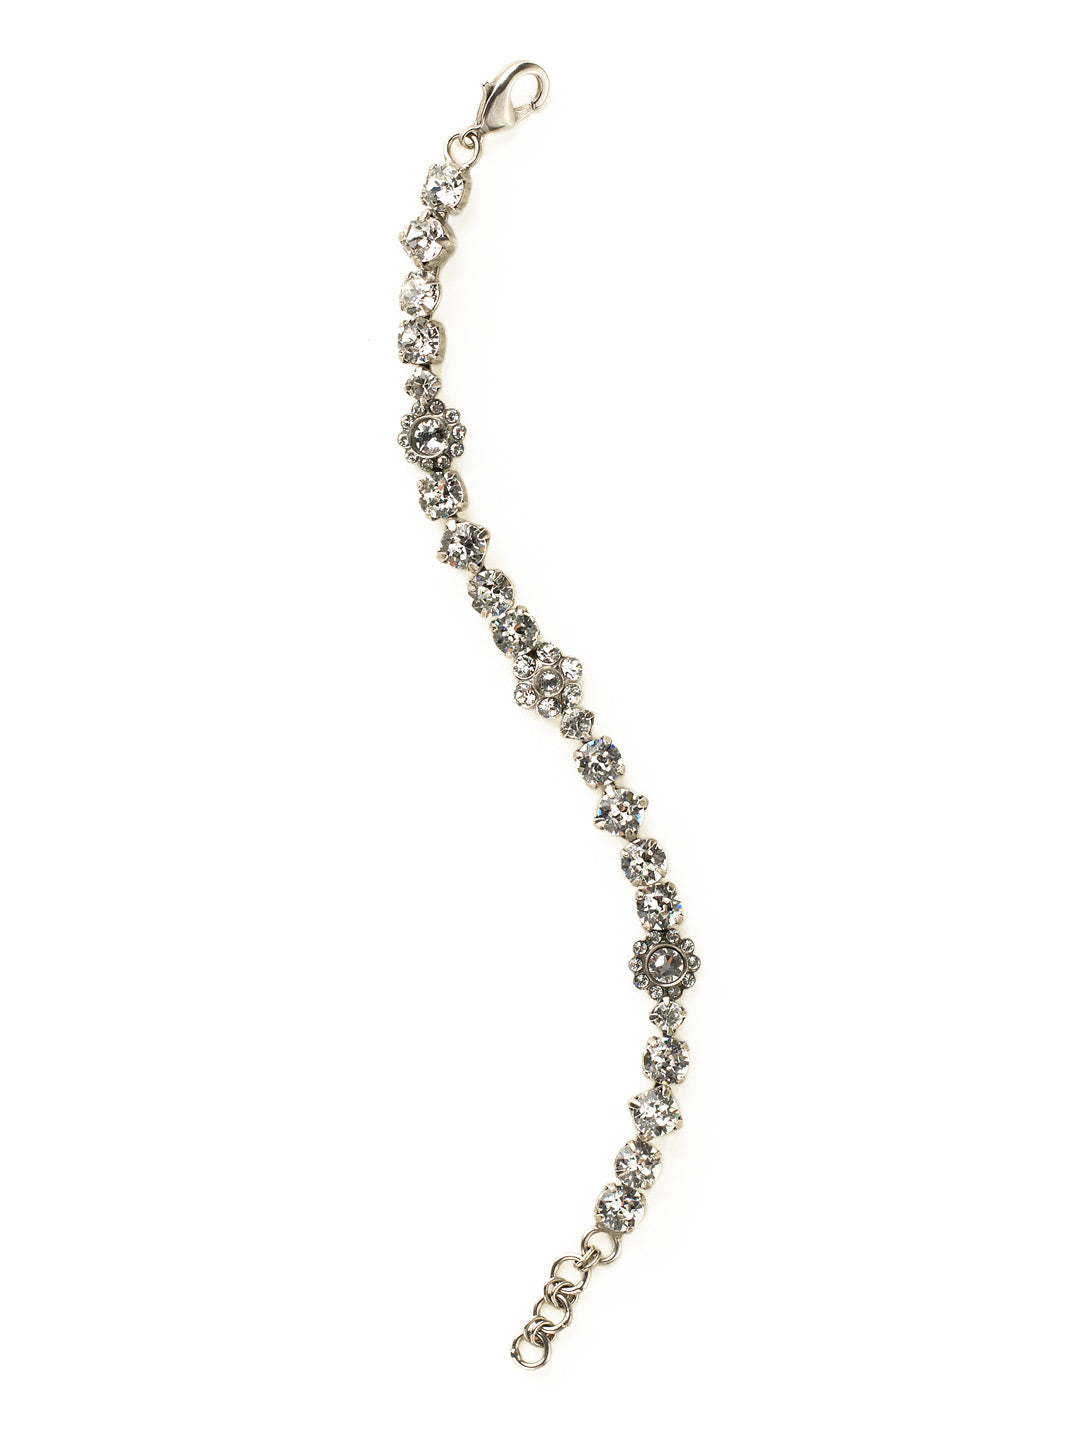 Classic Floral Tennis Bracelet - BBE2ASCRY - Blossoming beauty. This classic bracelet features a combination of round and floral cluster crystals to create the perfect amount of sweet sparkle. From Sorrelli's Crystal collection in our Antique Silver-tone finish.